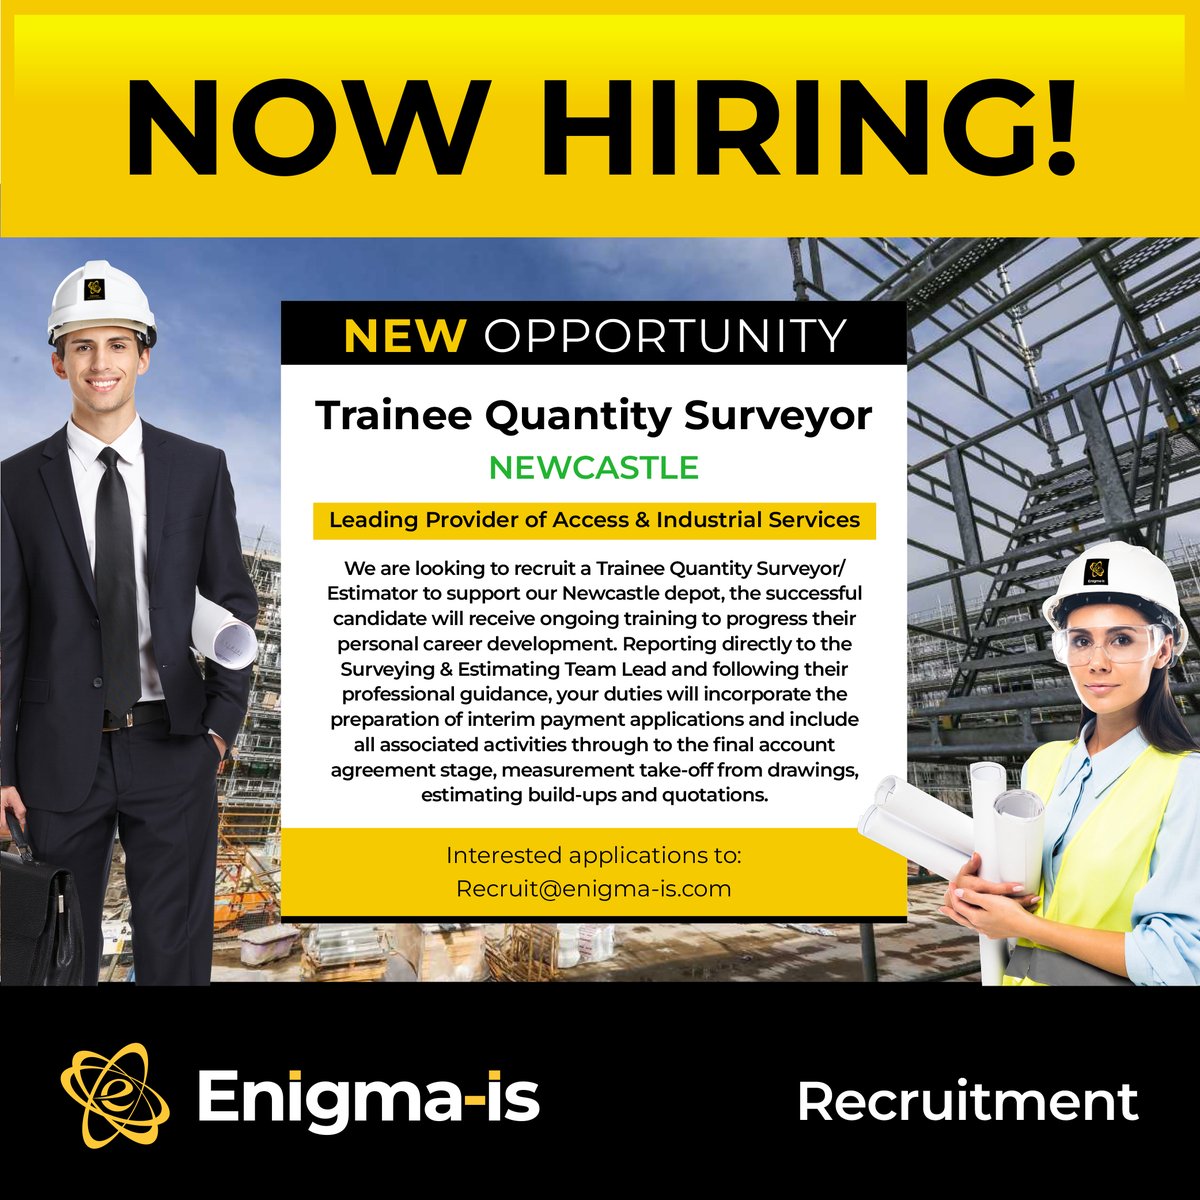 We’re Hiring! - Trainee Quantity Surveyor 🏗️

Newcastle

Submit your CV online ▶️
totaljobs.com/job/quantity-s…

Leading provider of access & industrial services

#QuantitySurveyor
#Jobs #Newcastle #Recruitment